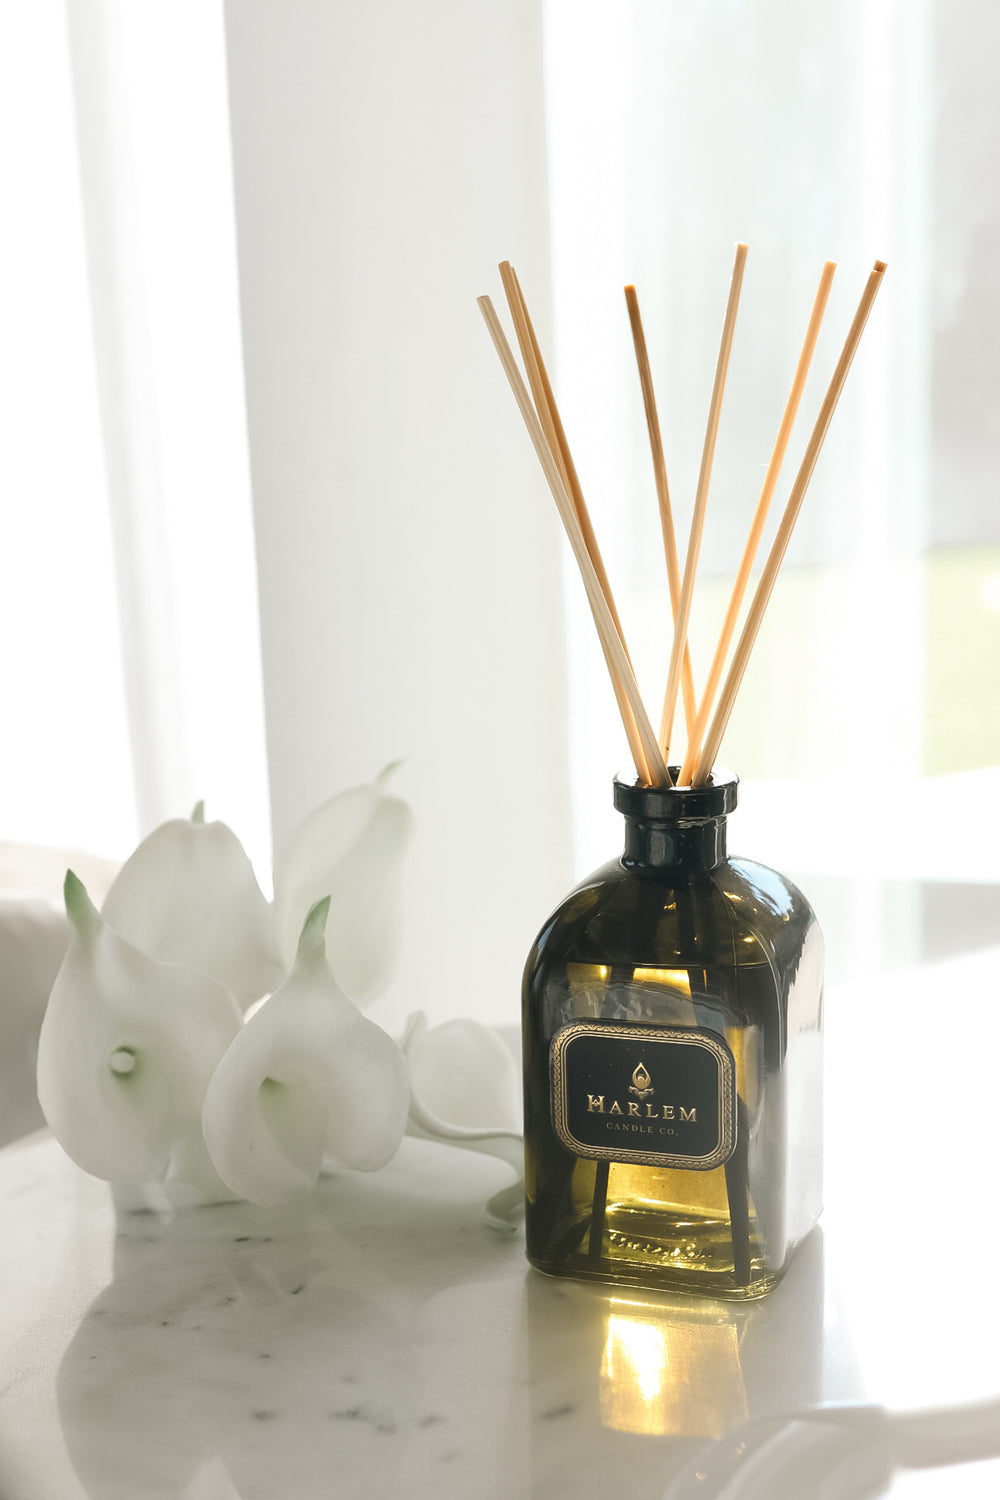 Our 8 fluid oz. Holiday Reed Diffuser with reeds, in a green glass vessel sitting on a white table next to flowers.